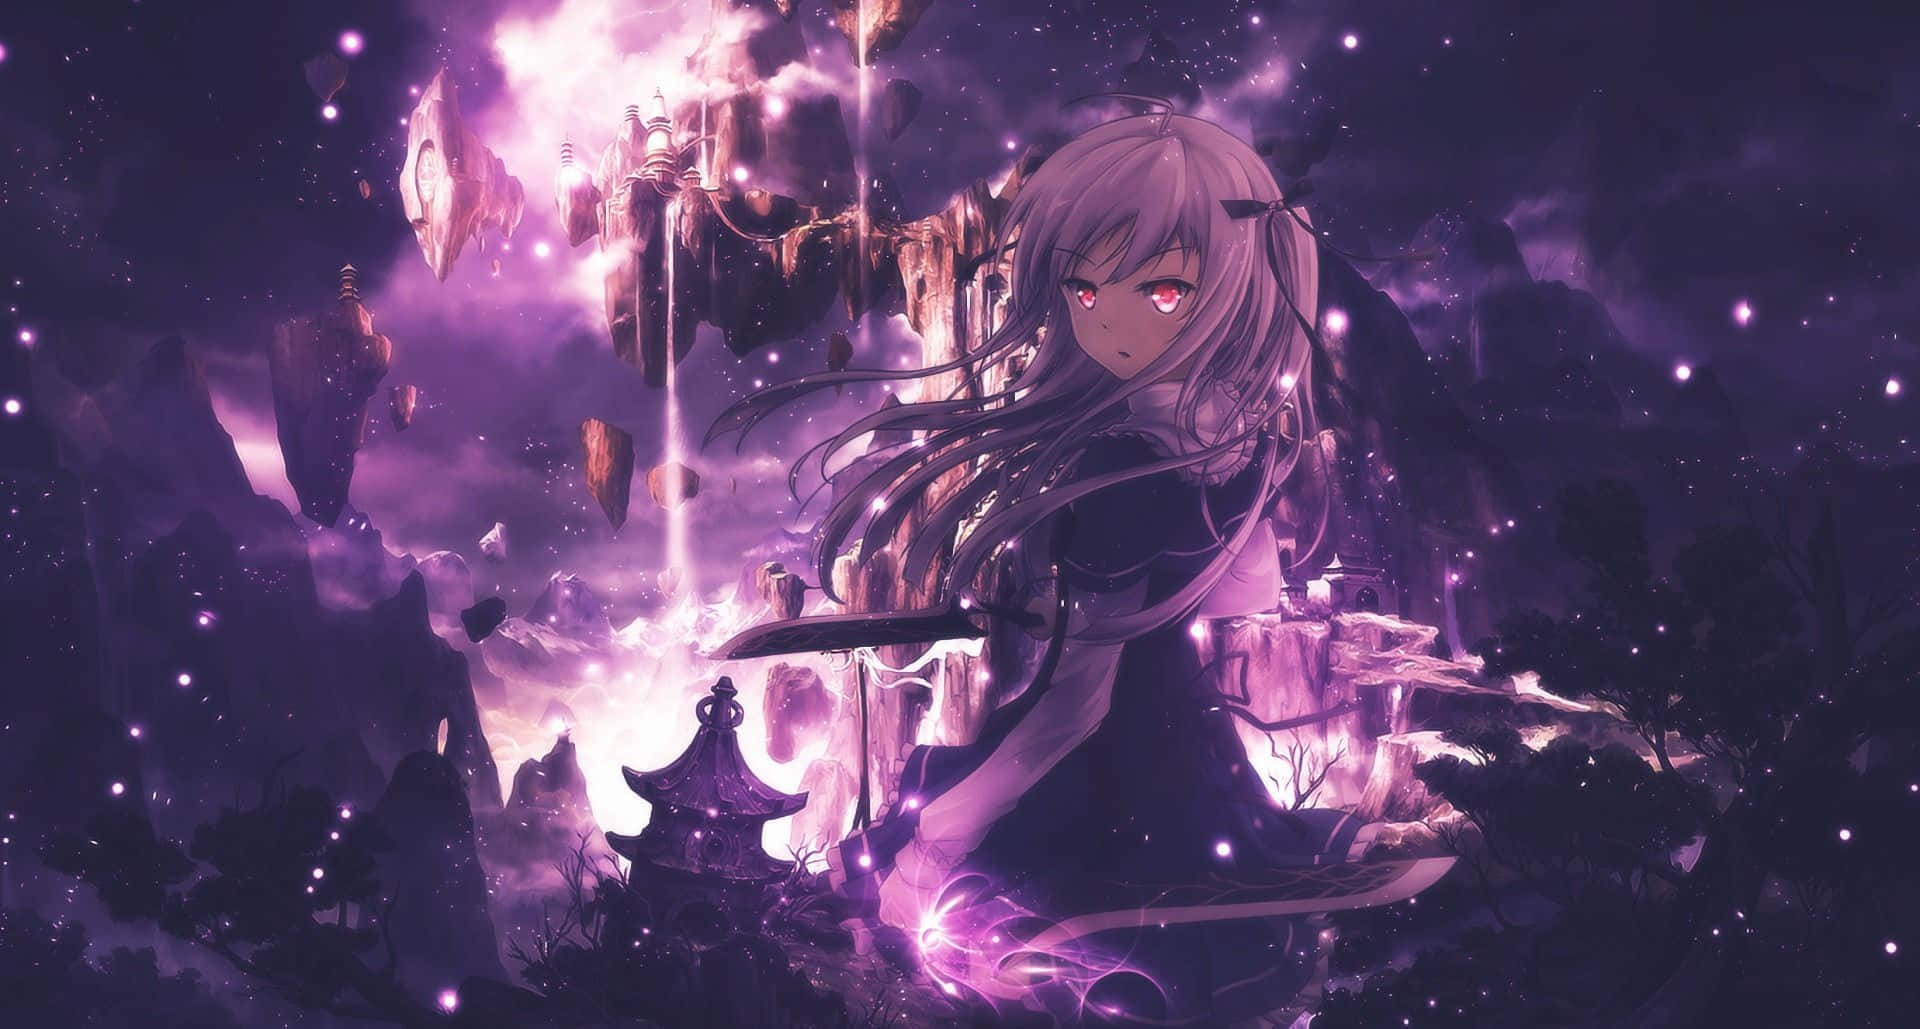 A purple-haired anime girl gazing into the distance Wallpaper